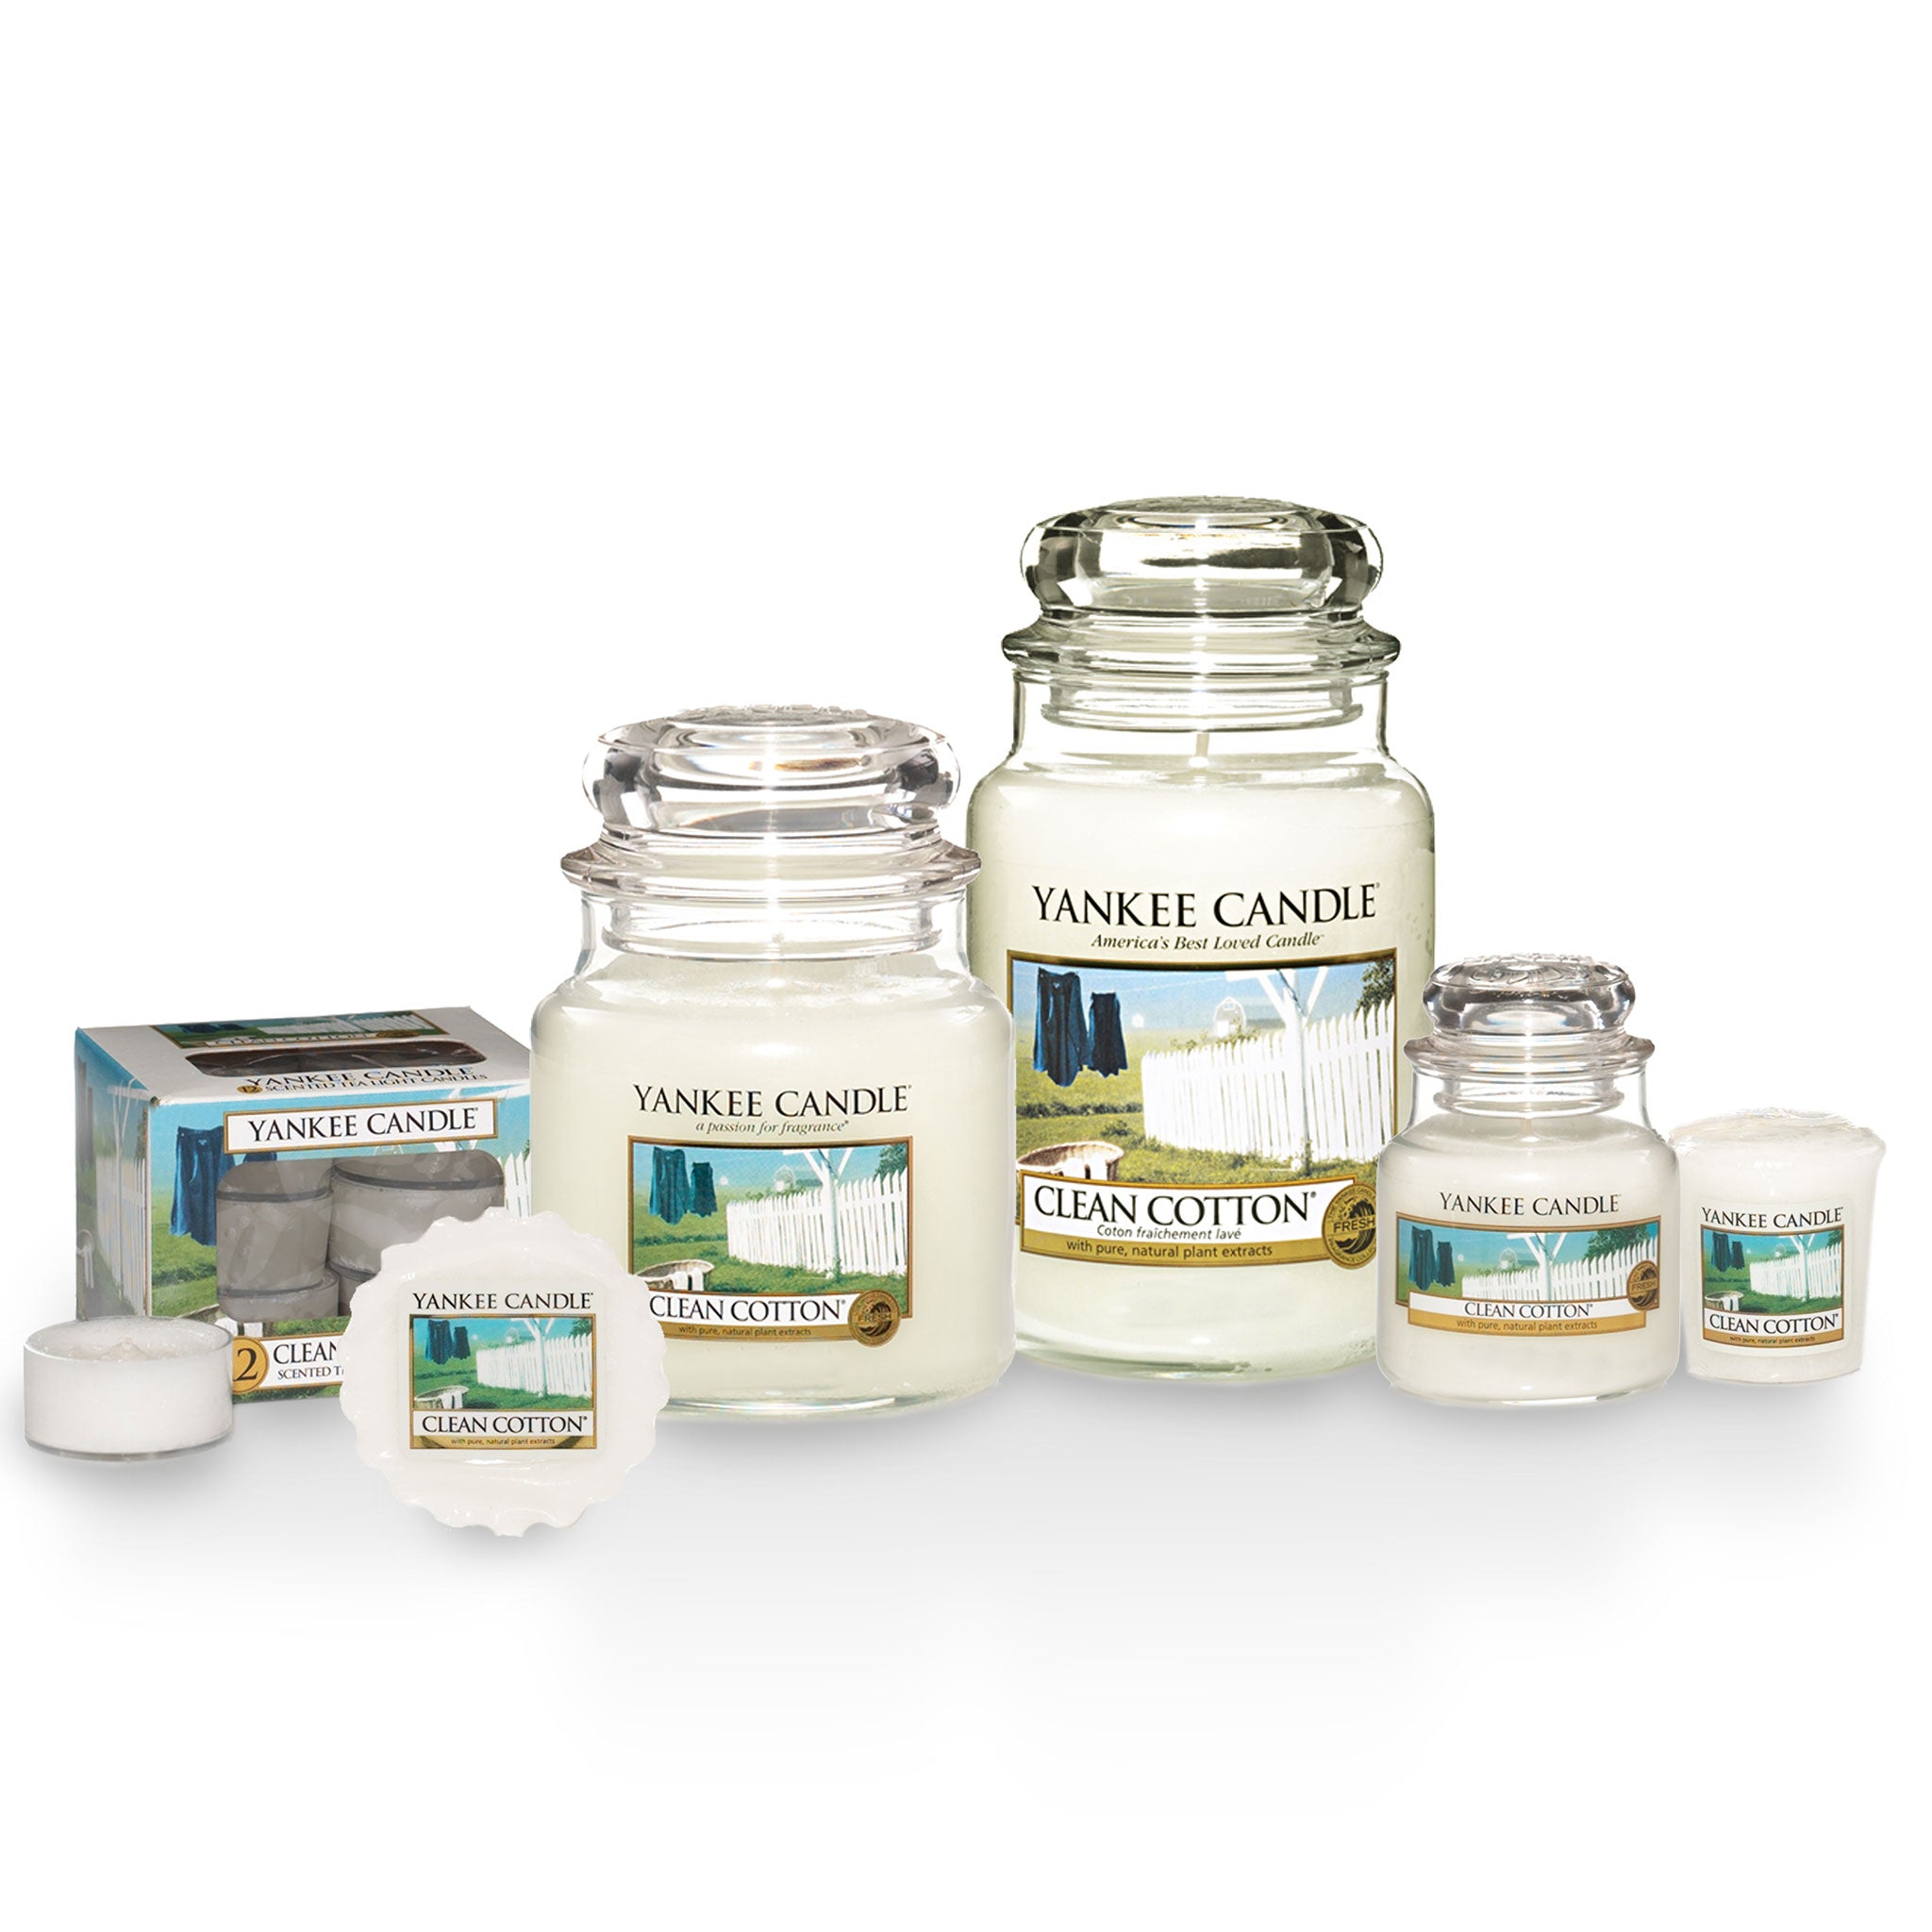 CLEAN COTTON -Yankee Candle- Giara Media – Candle With Care